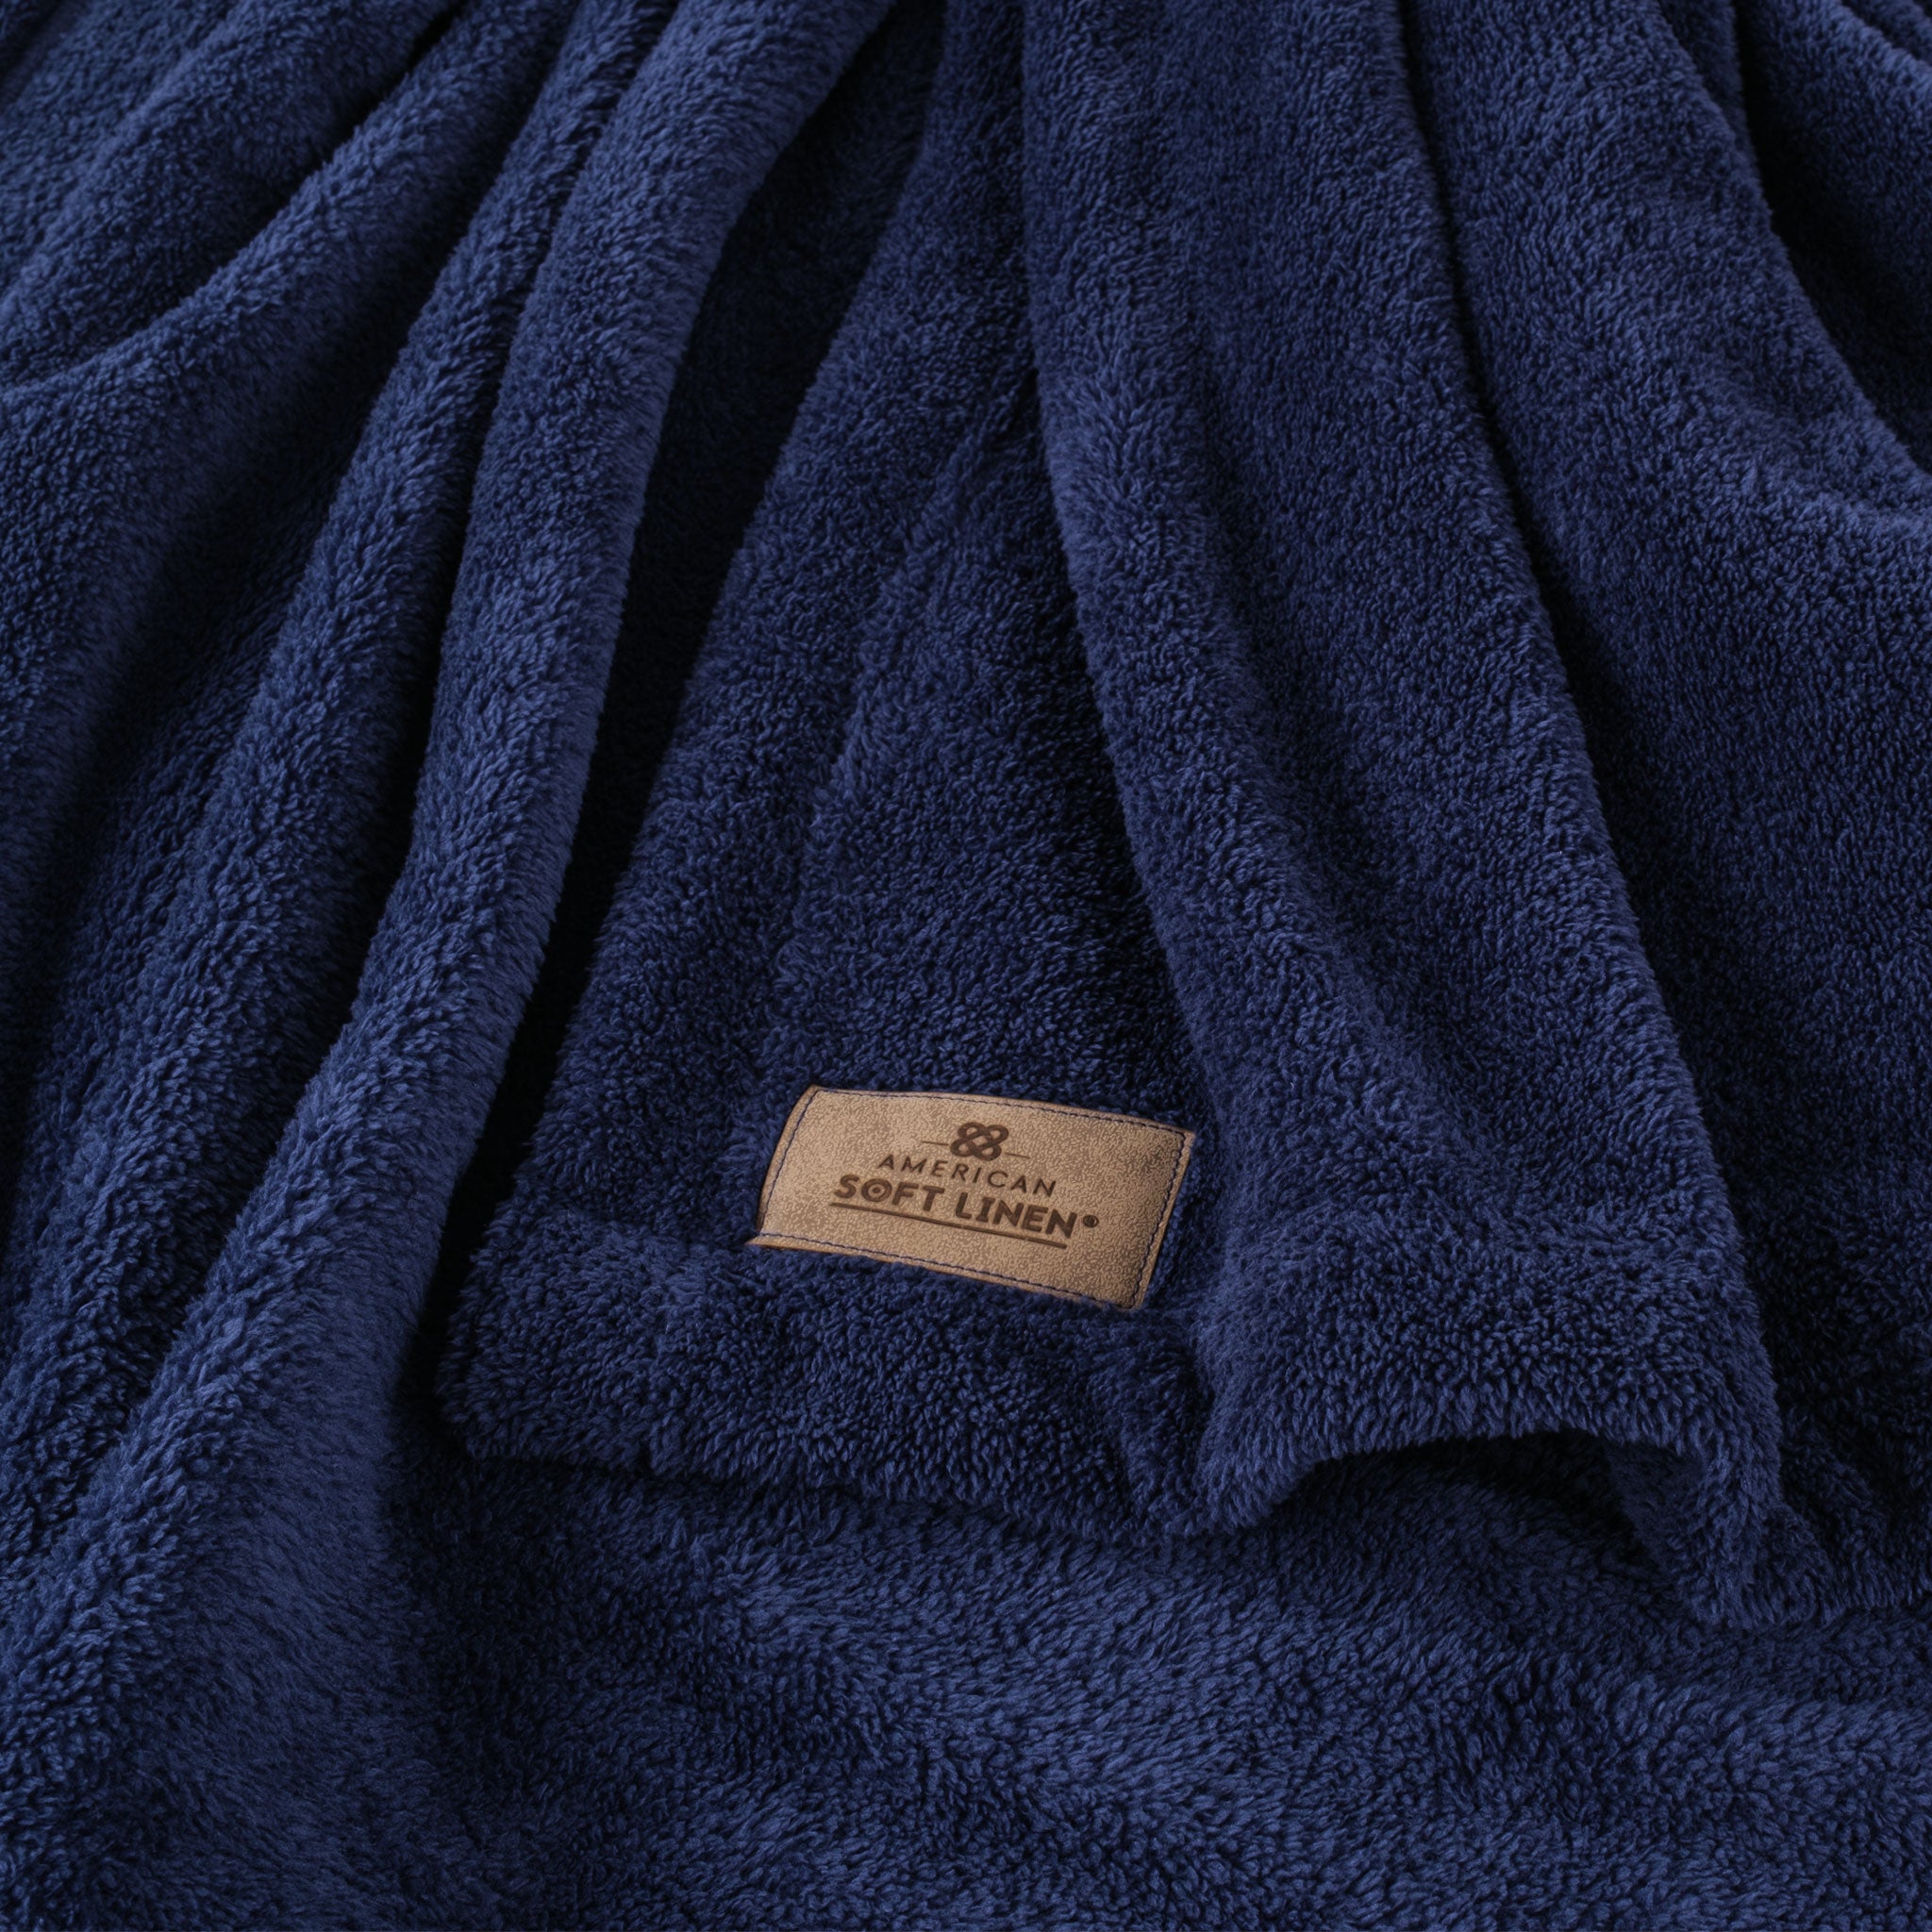 American Soft Linen - Bedding Fleece Blanket - Wholesale - 15 Set Case Pack - Twin Size 60x80 inches - Navy-Blue - 4